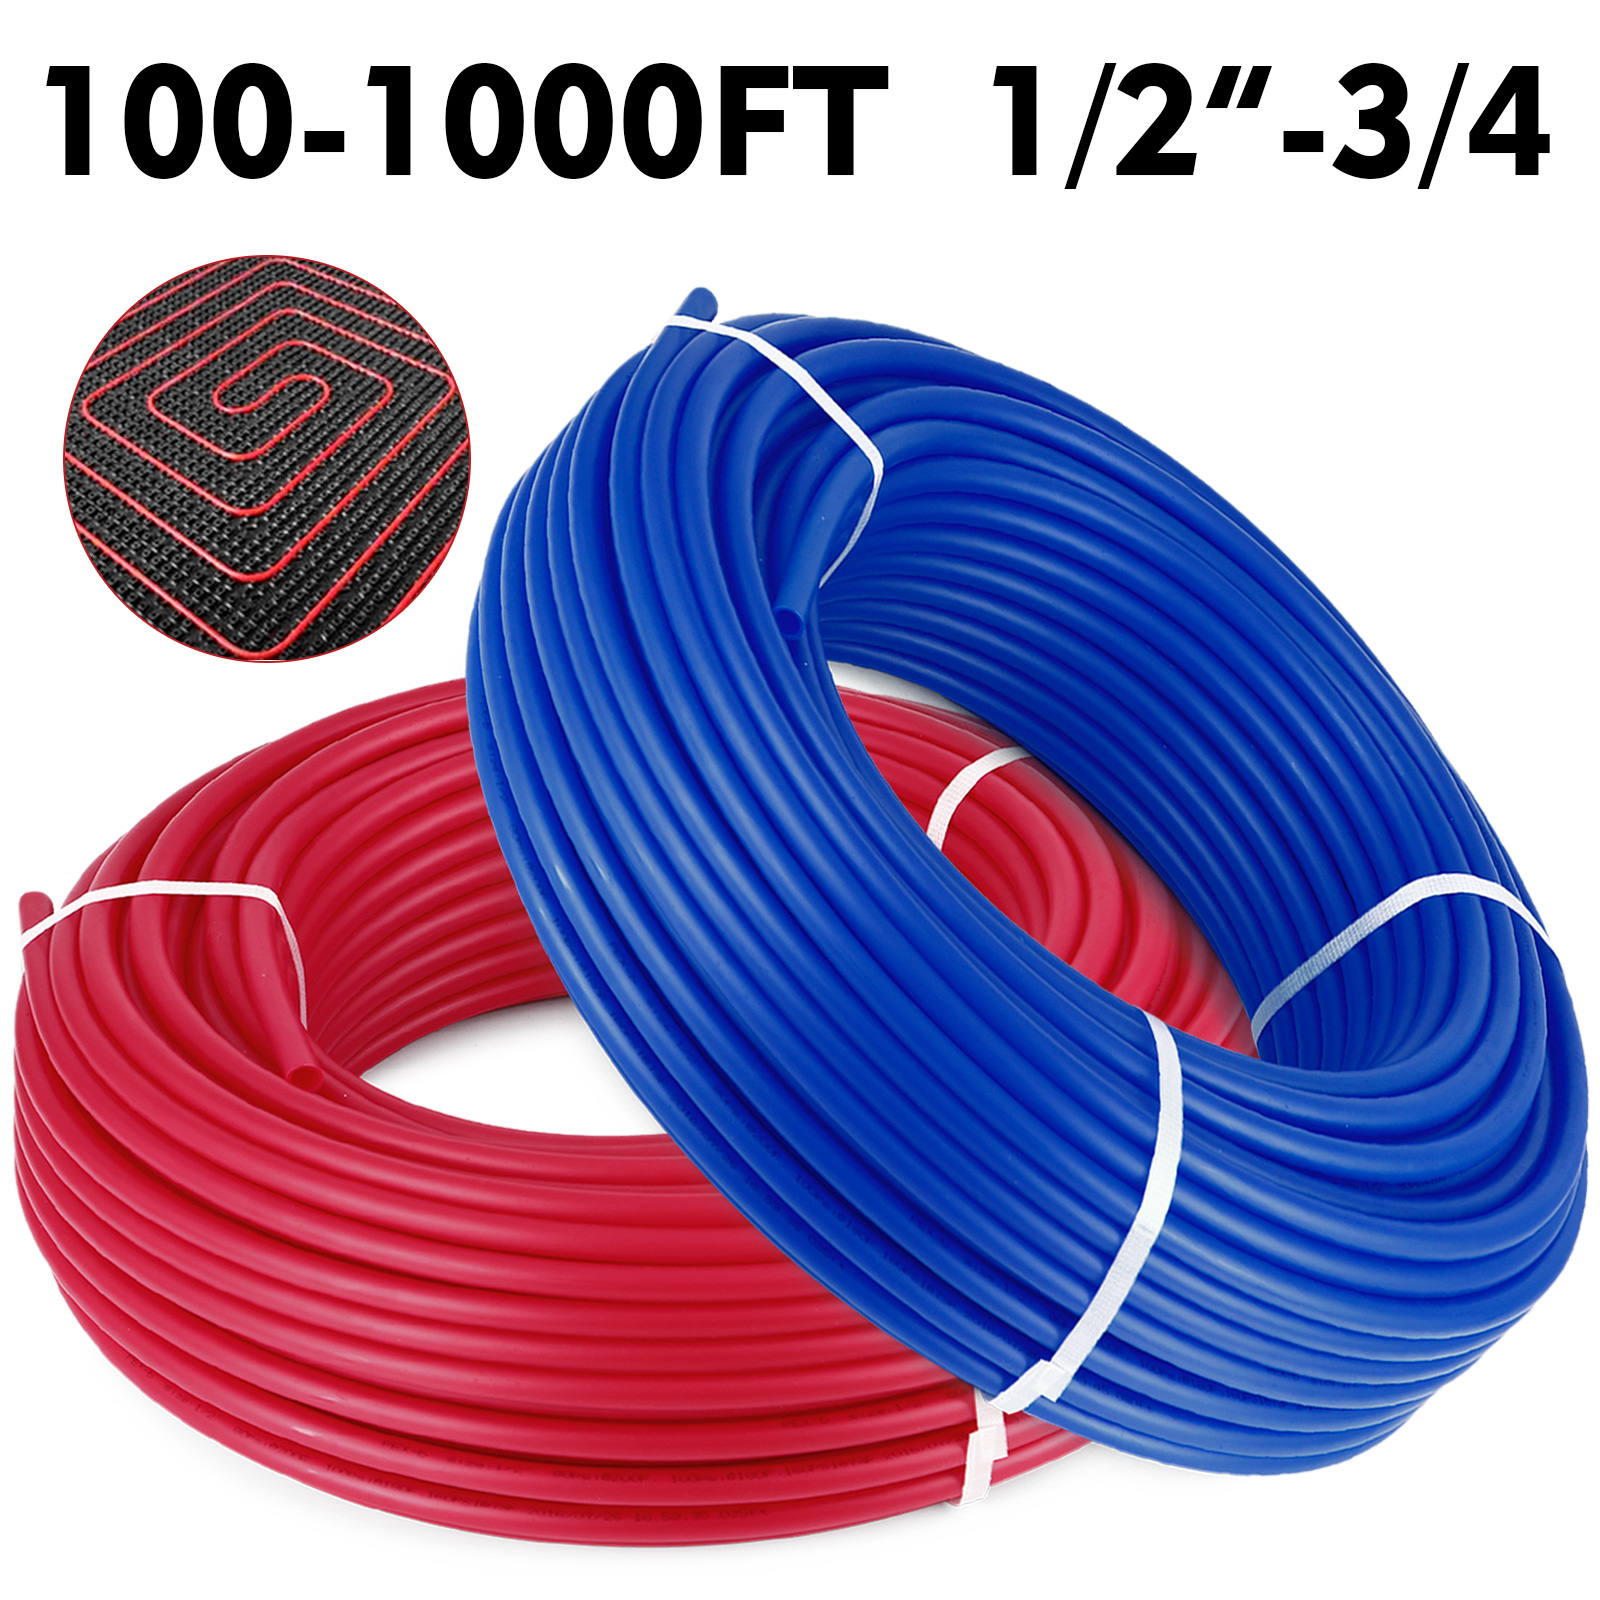 1/2"x100 200 300 1000ft Pex Tubing Oxygen Barrier/Non Barrier Radiant Pex Tubing For Radiant Heat